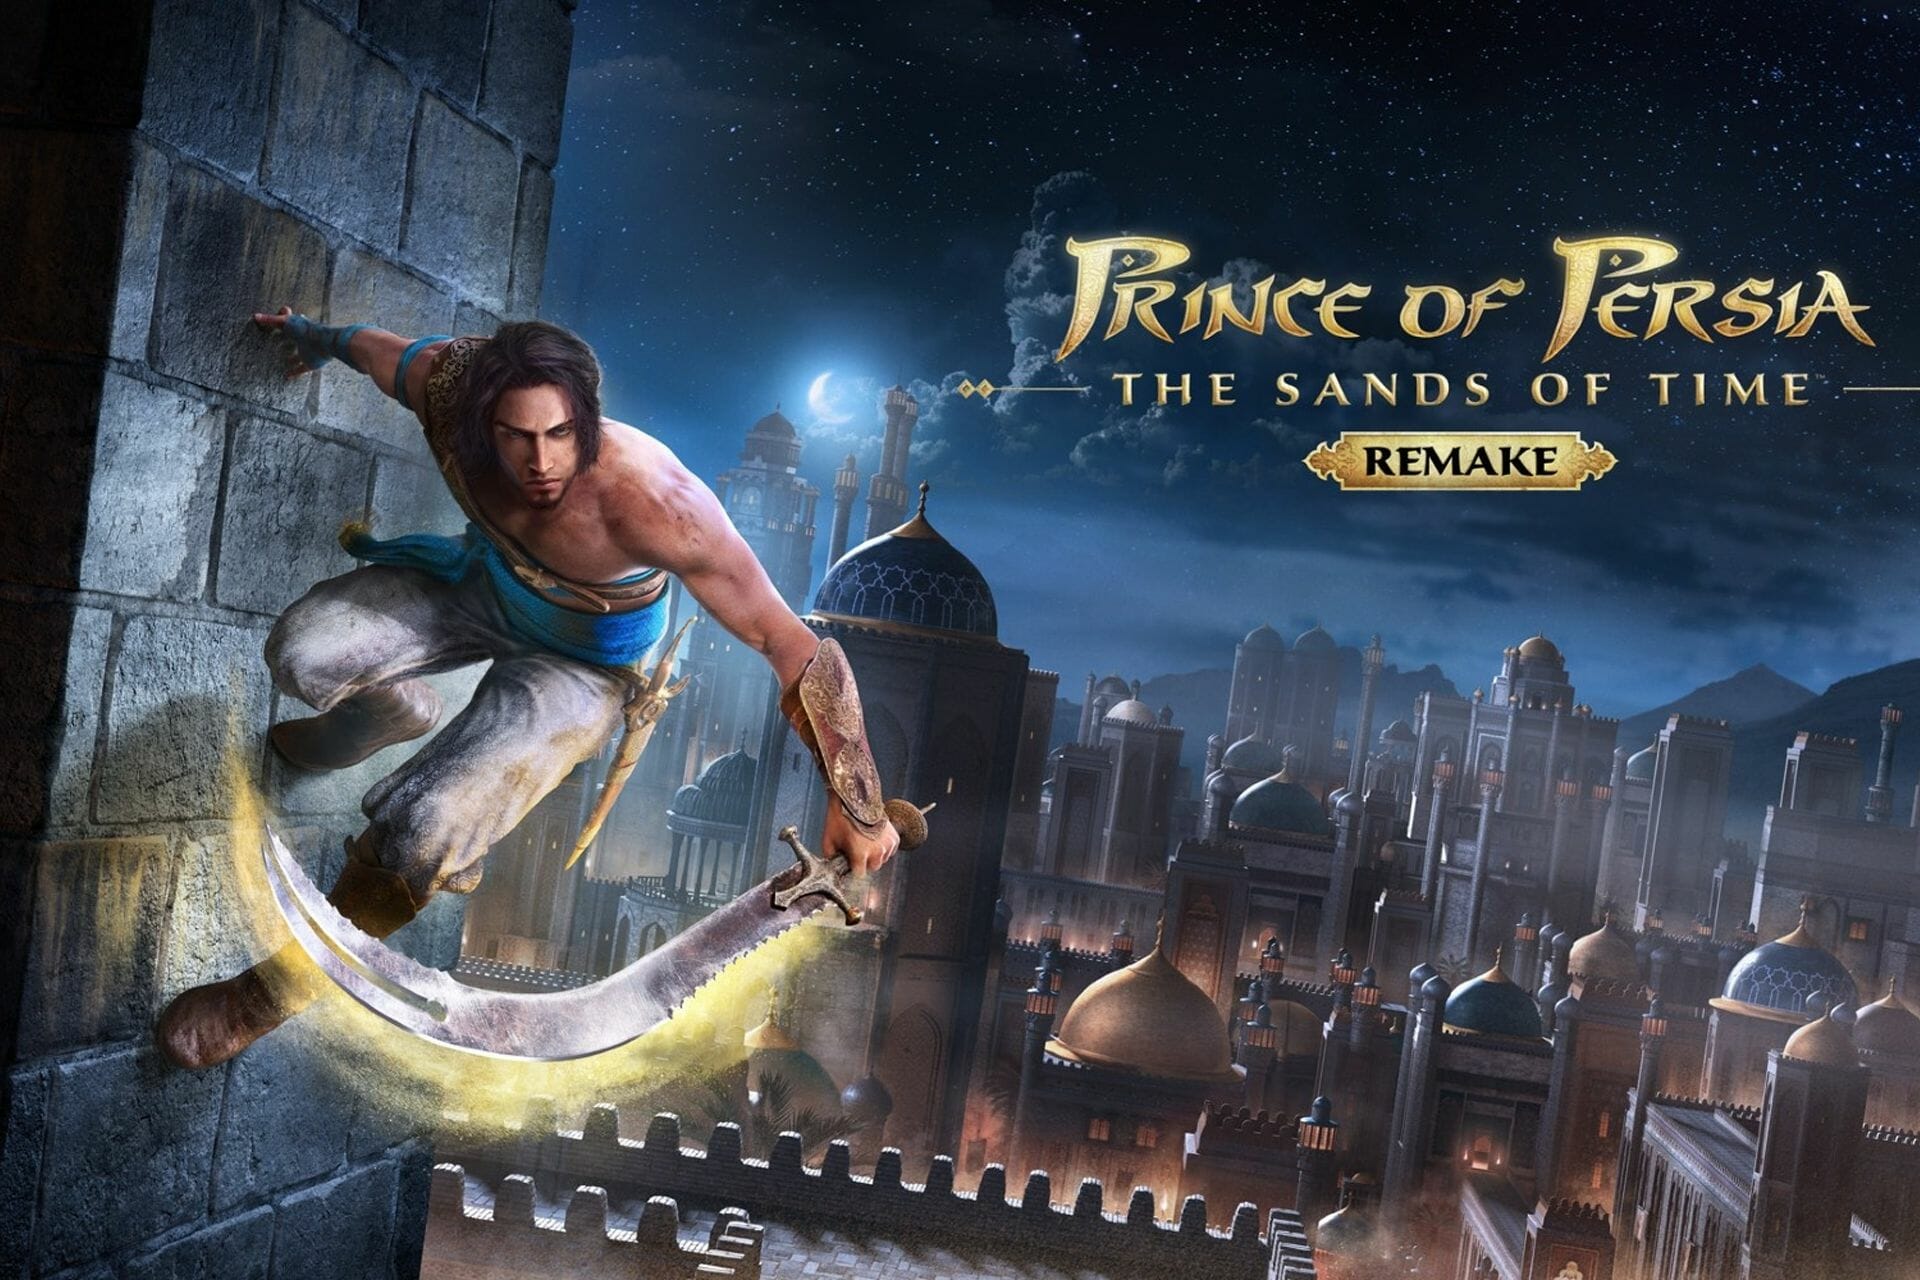 Can I play Prince of Persia on Windows 10